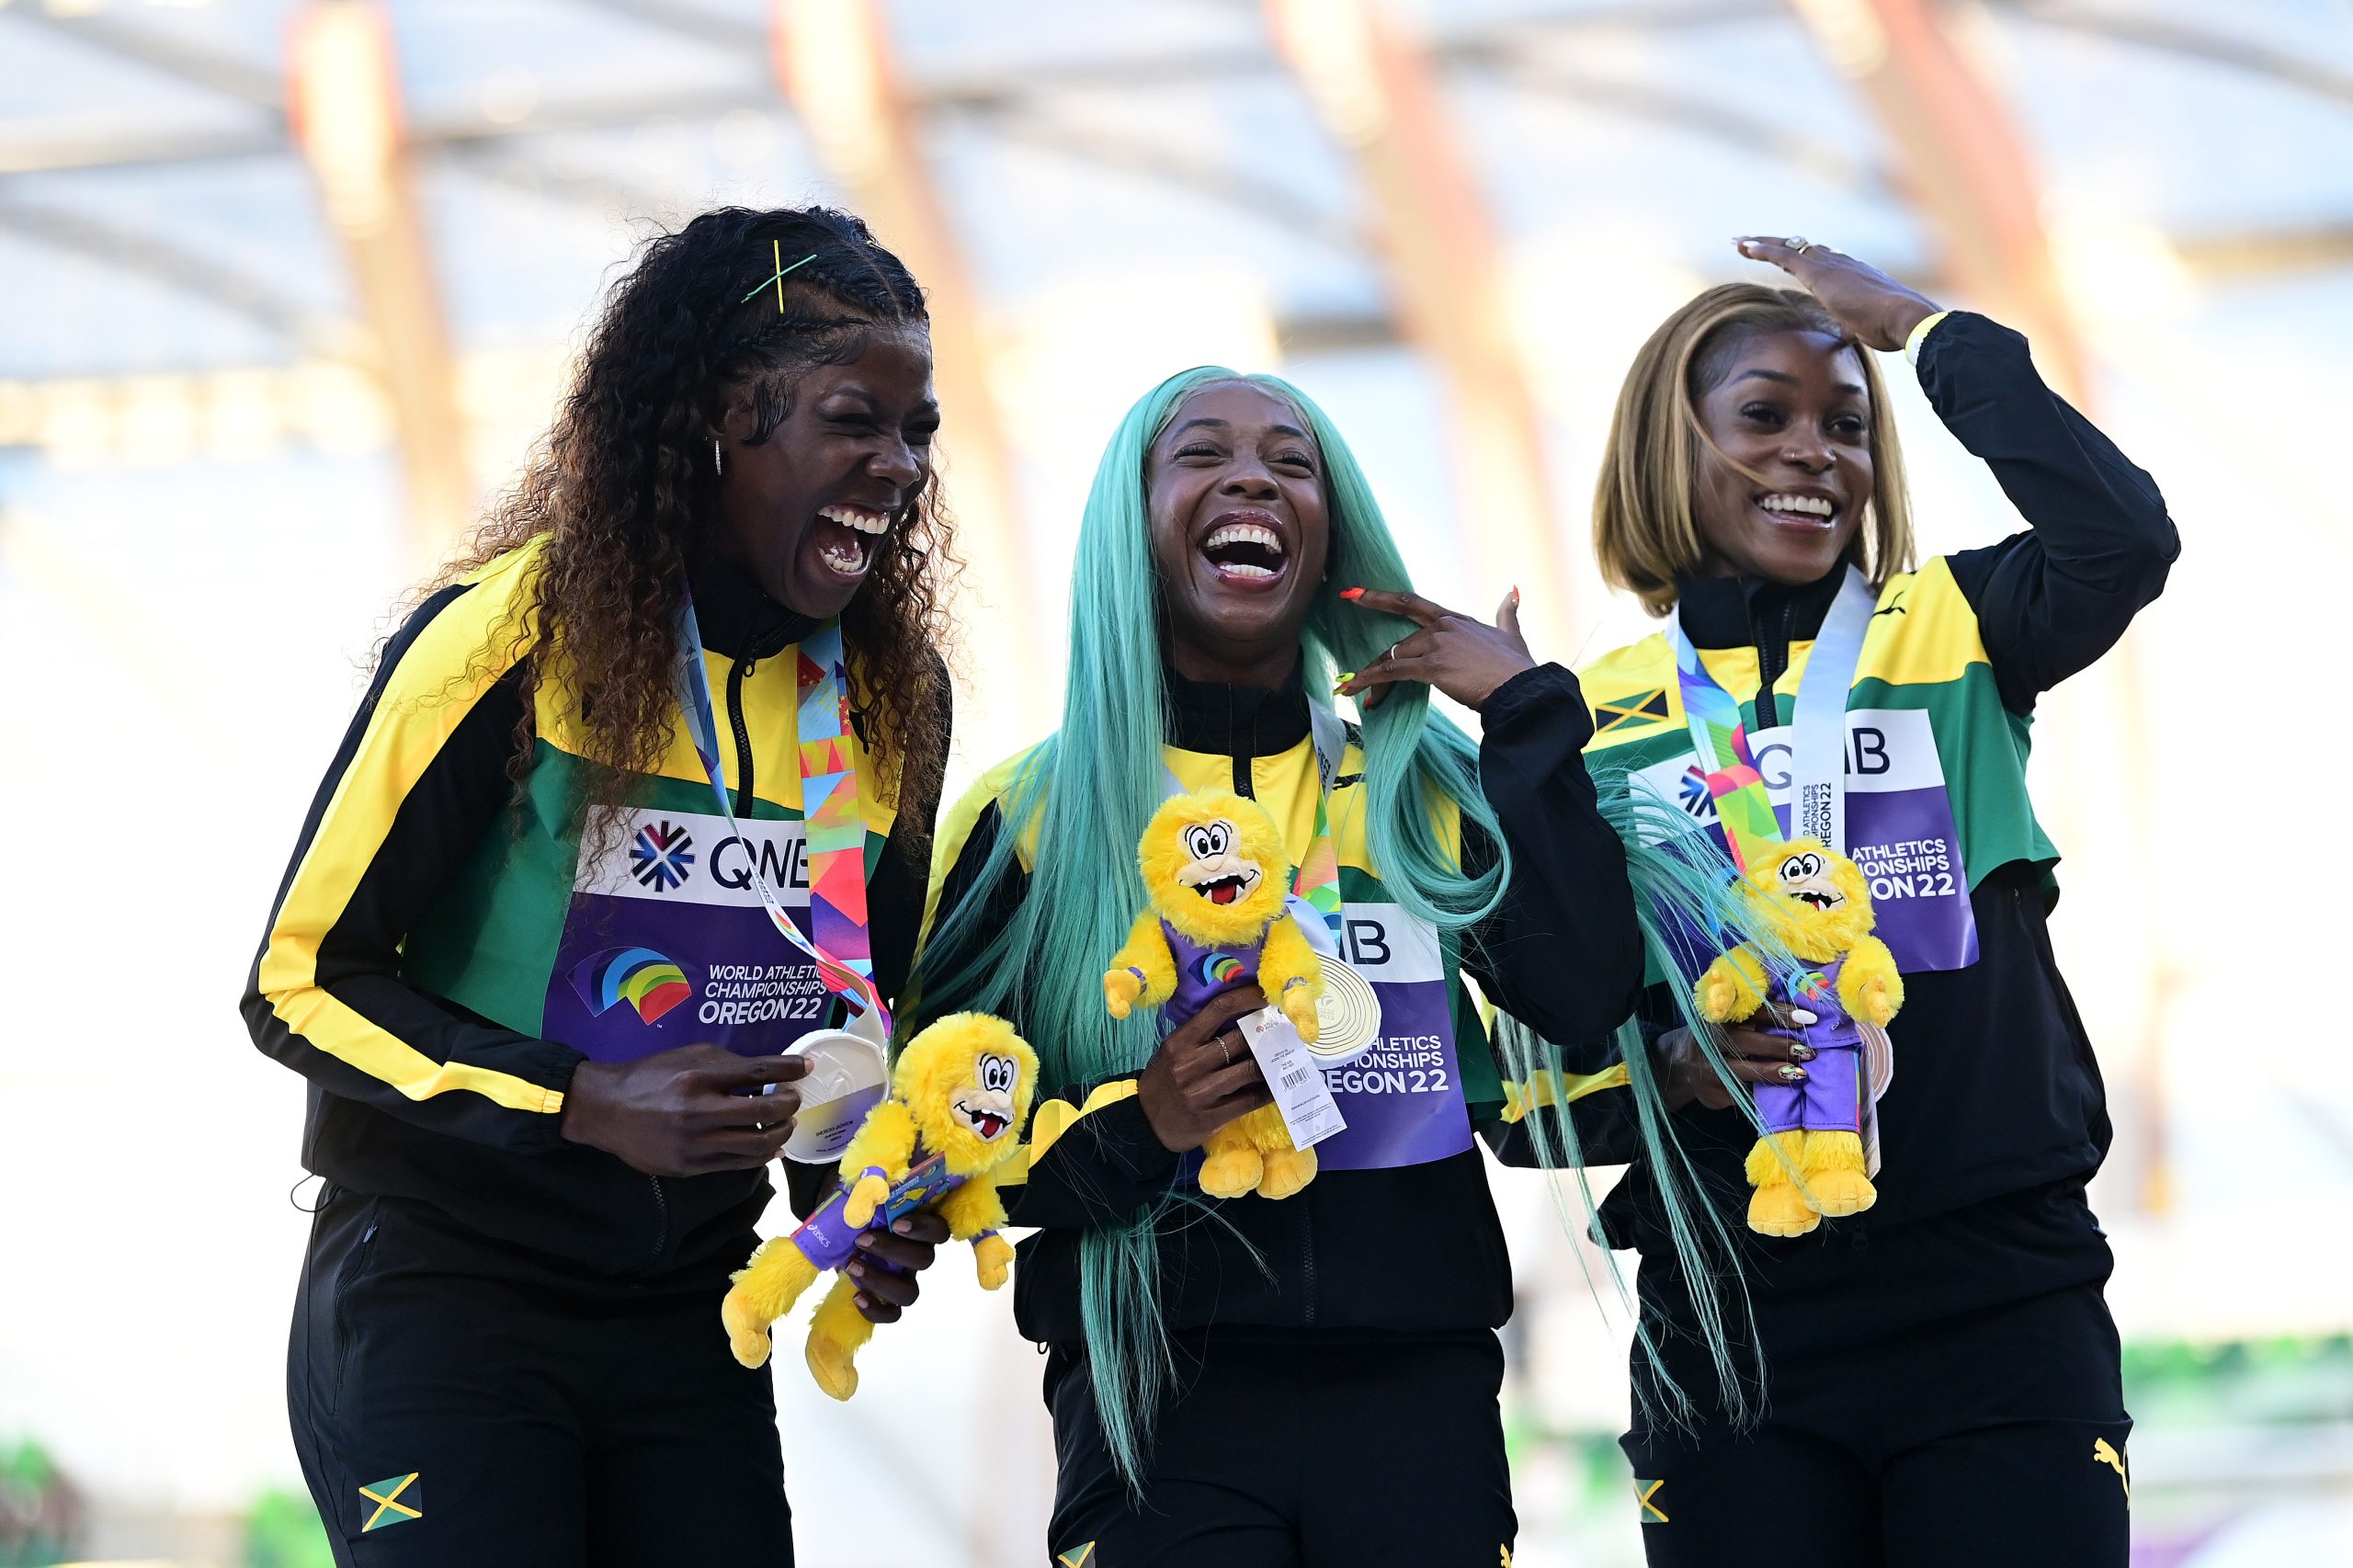 Silver medalist Shericka Jackson of Team Jamaica, gold medalist Shelly-Ann Fraser-Pryce of Team Jamaica and bronze medalist Elaine Thompson-Herah of Team Jamaica pose during the medal ceremony for the Women's 100m Final on day four of the World Athletics Championships Oregon22